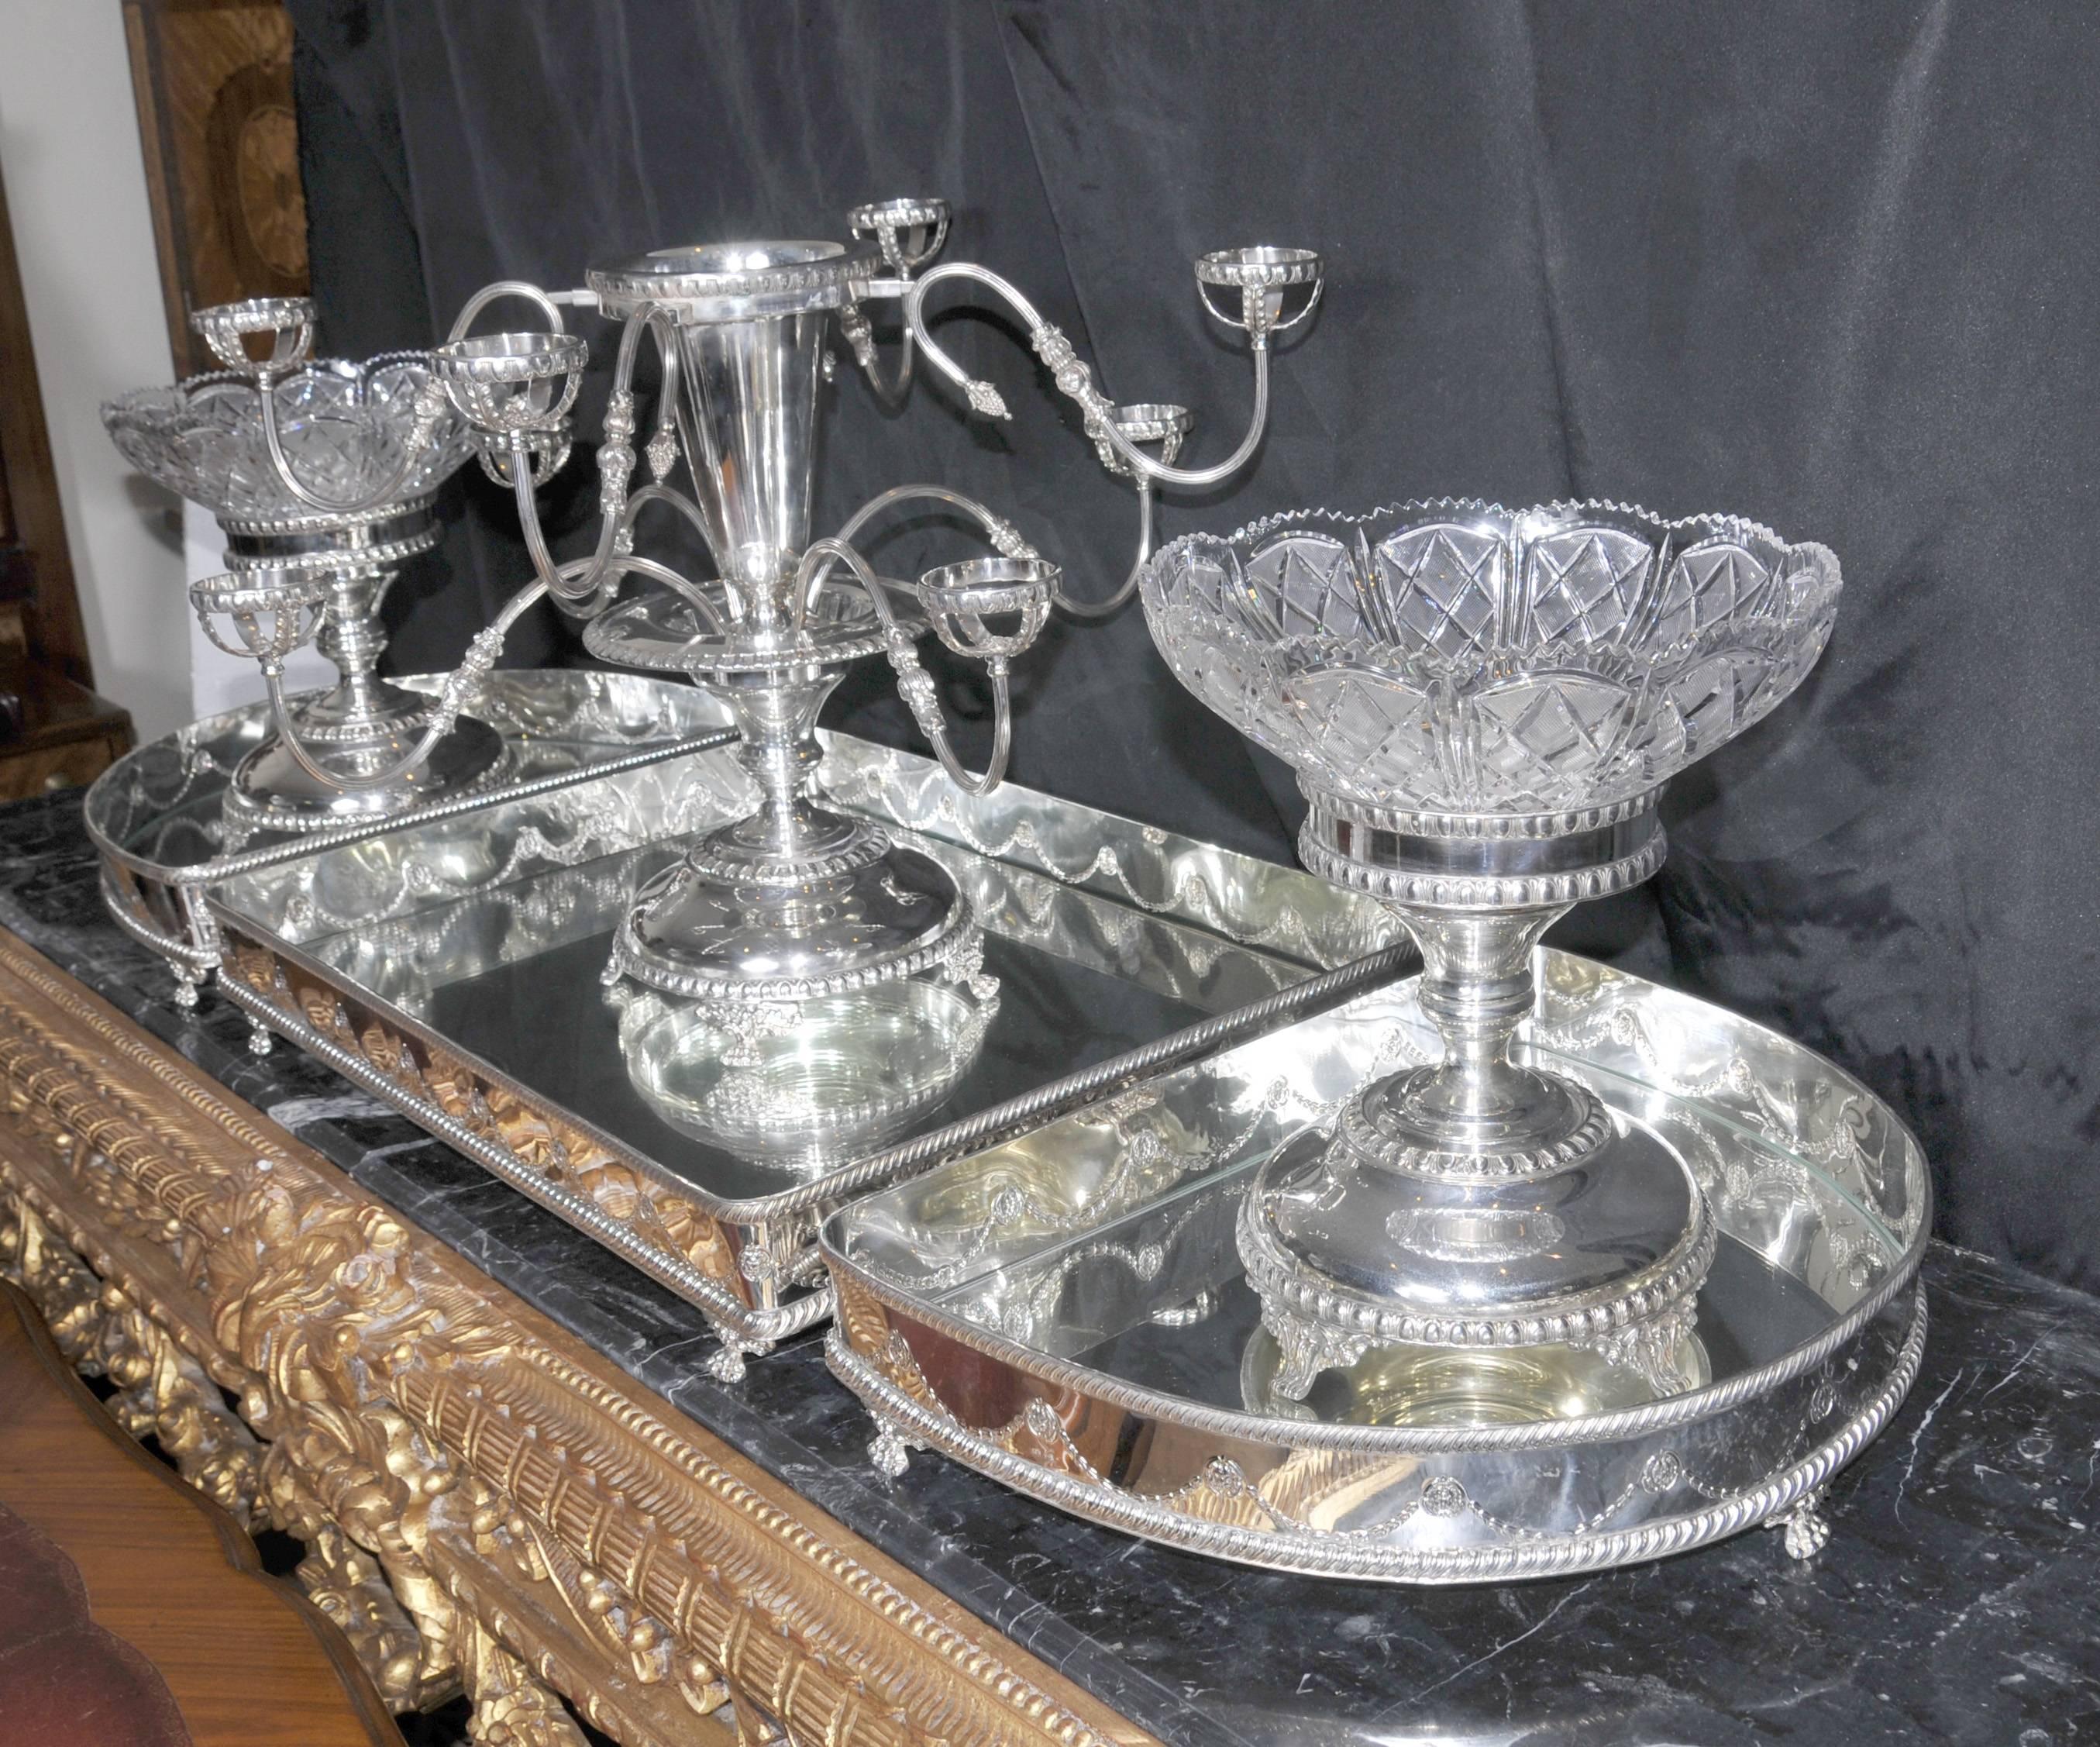 Breathtaking Victorian style silver plate centrepiece.
Hopefully the photos do this work of art some justice, definitely better in the flesh.
Please see close up photos of the hallmarks on the underside.
Centrepiece has eight branches holding